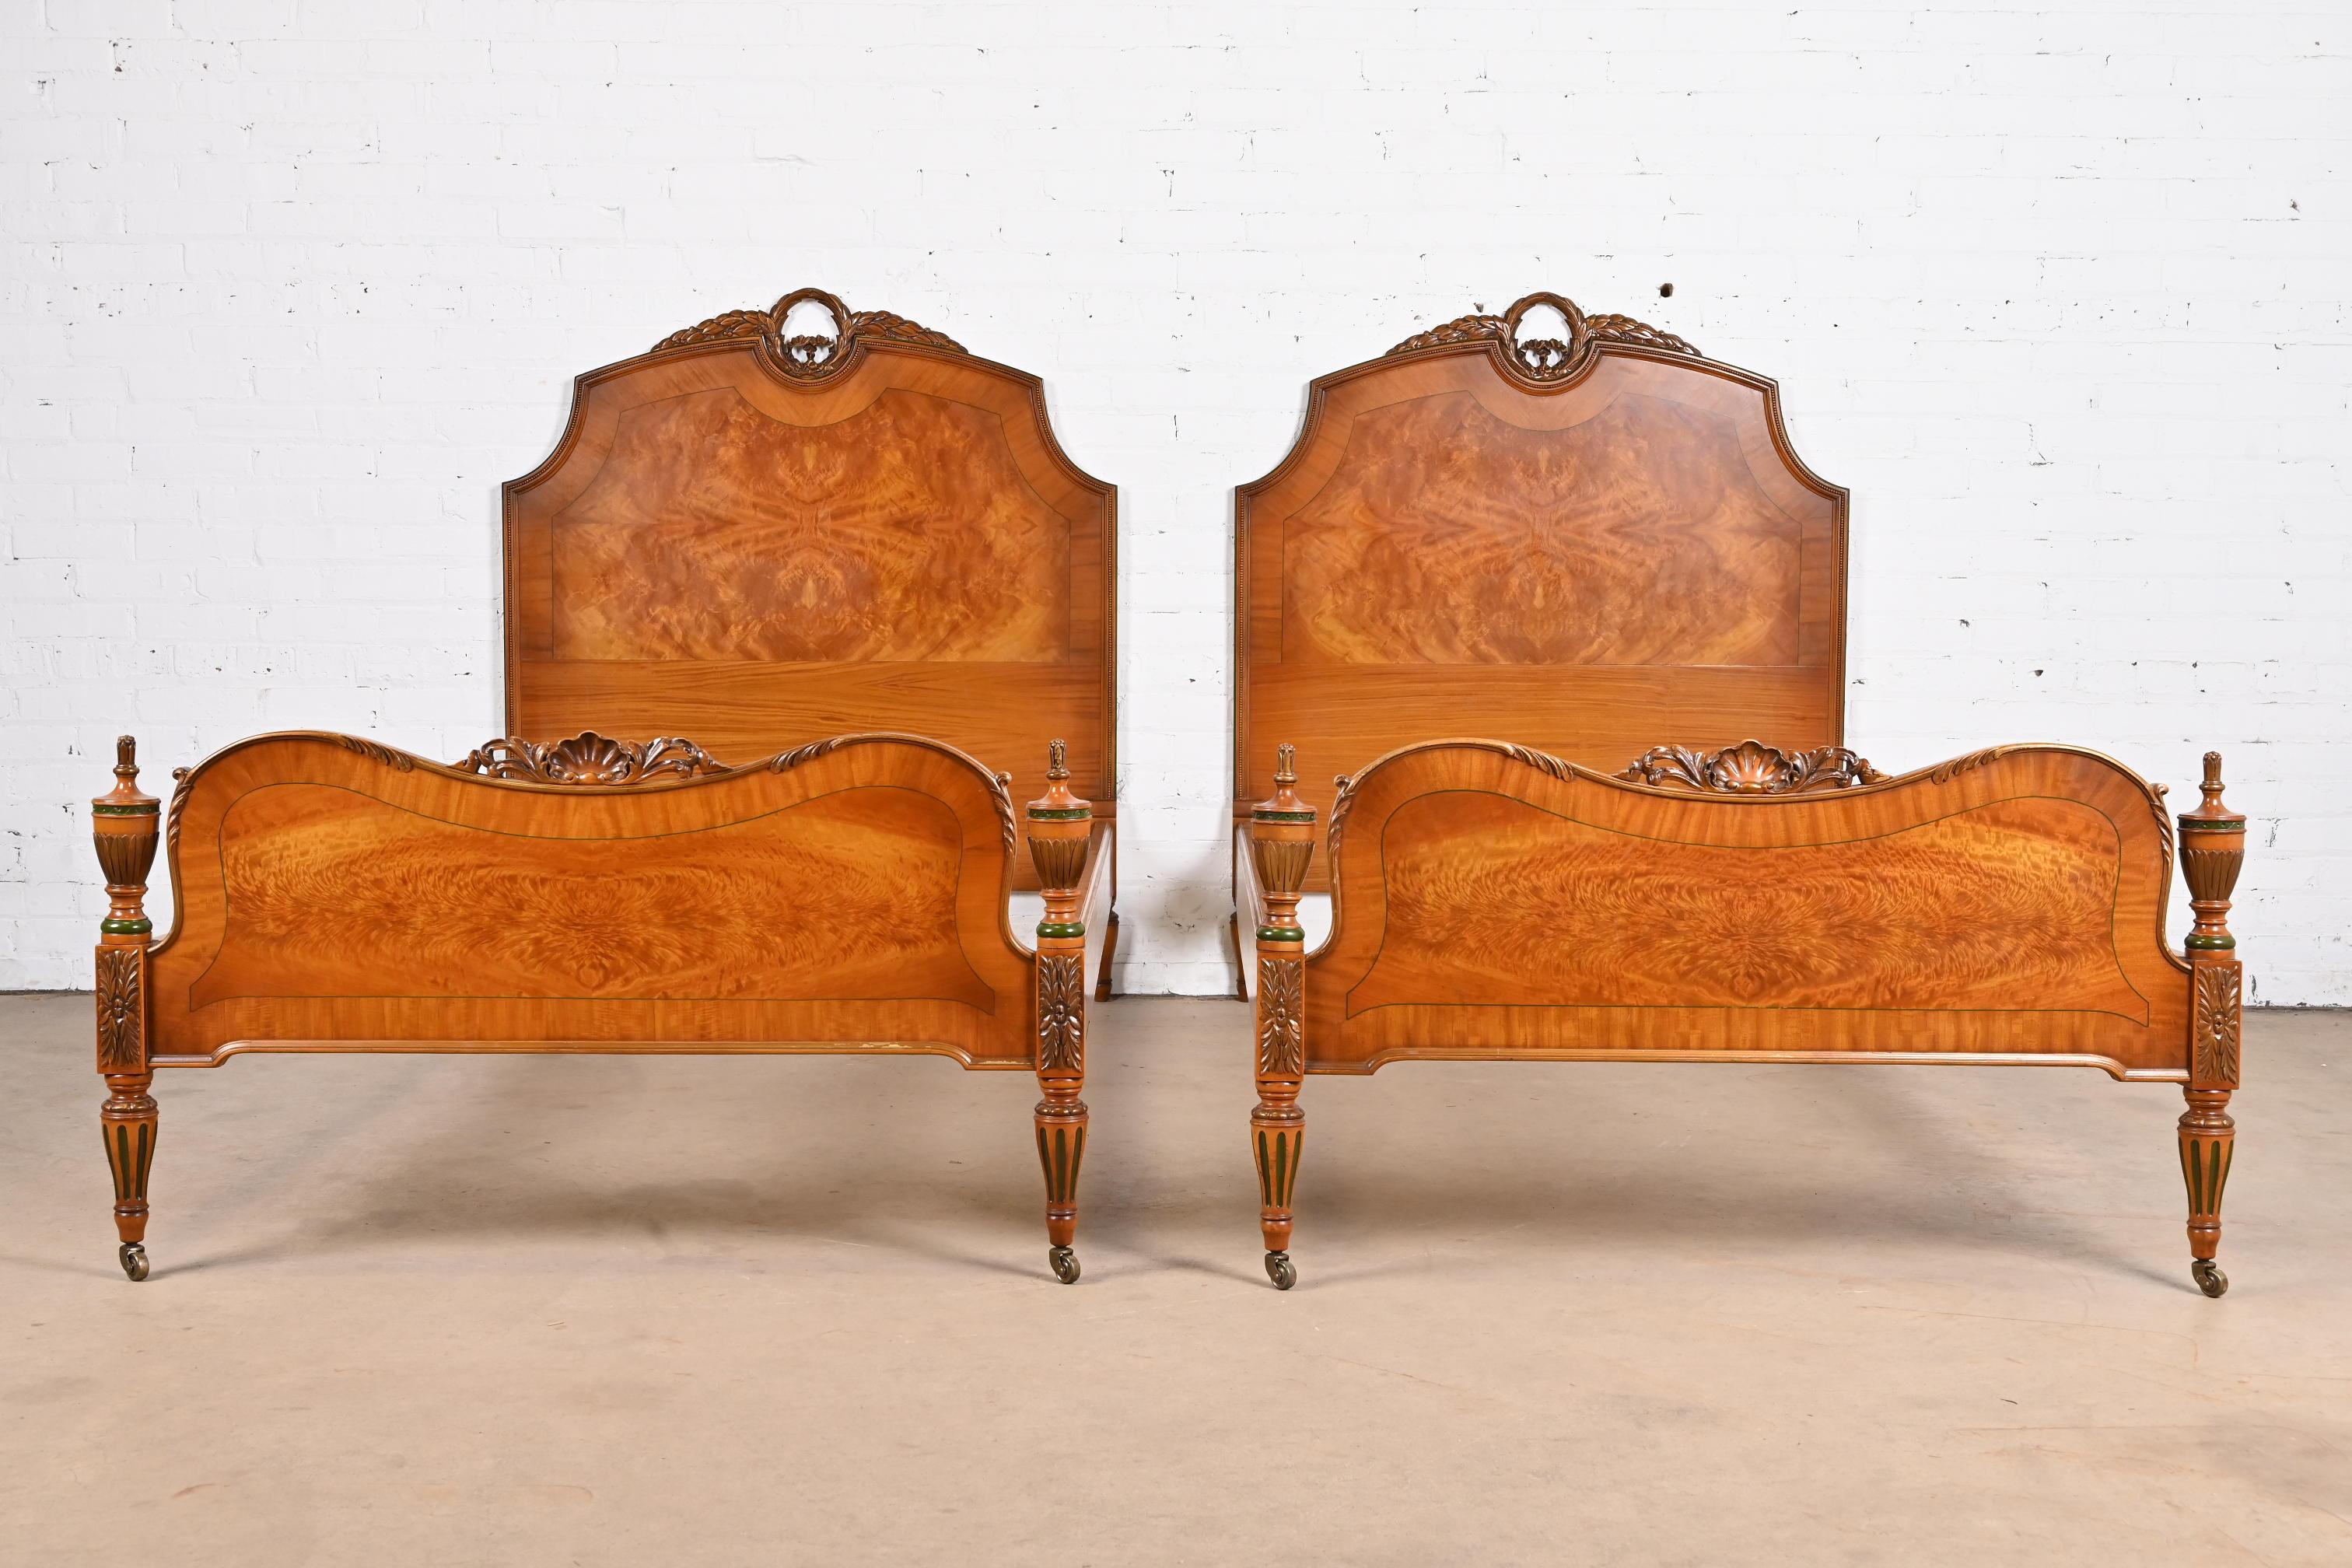 American French Regency Louis XVI Carved Satinwood and Burl Wood Twin Beds, Pair